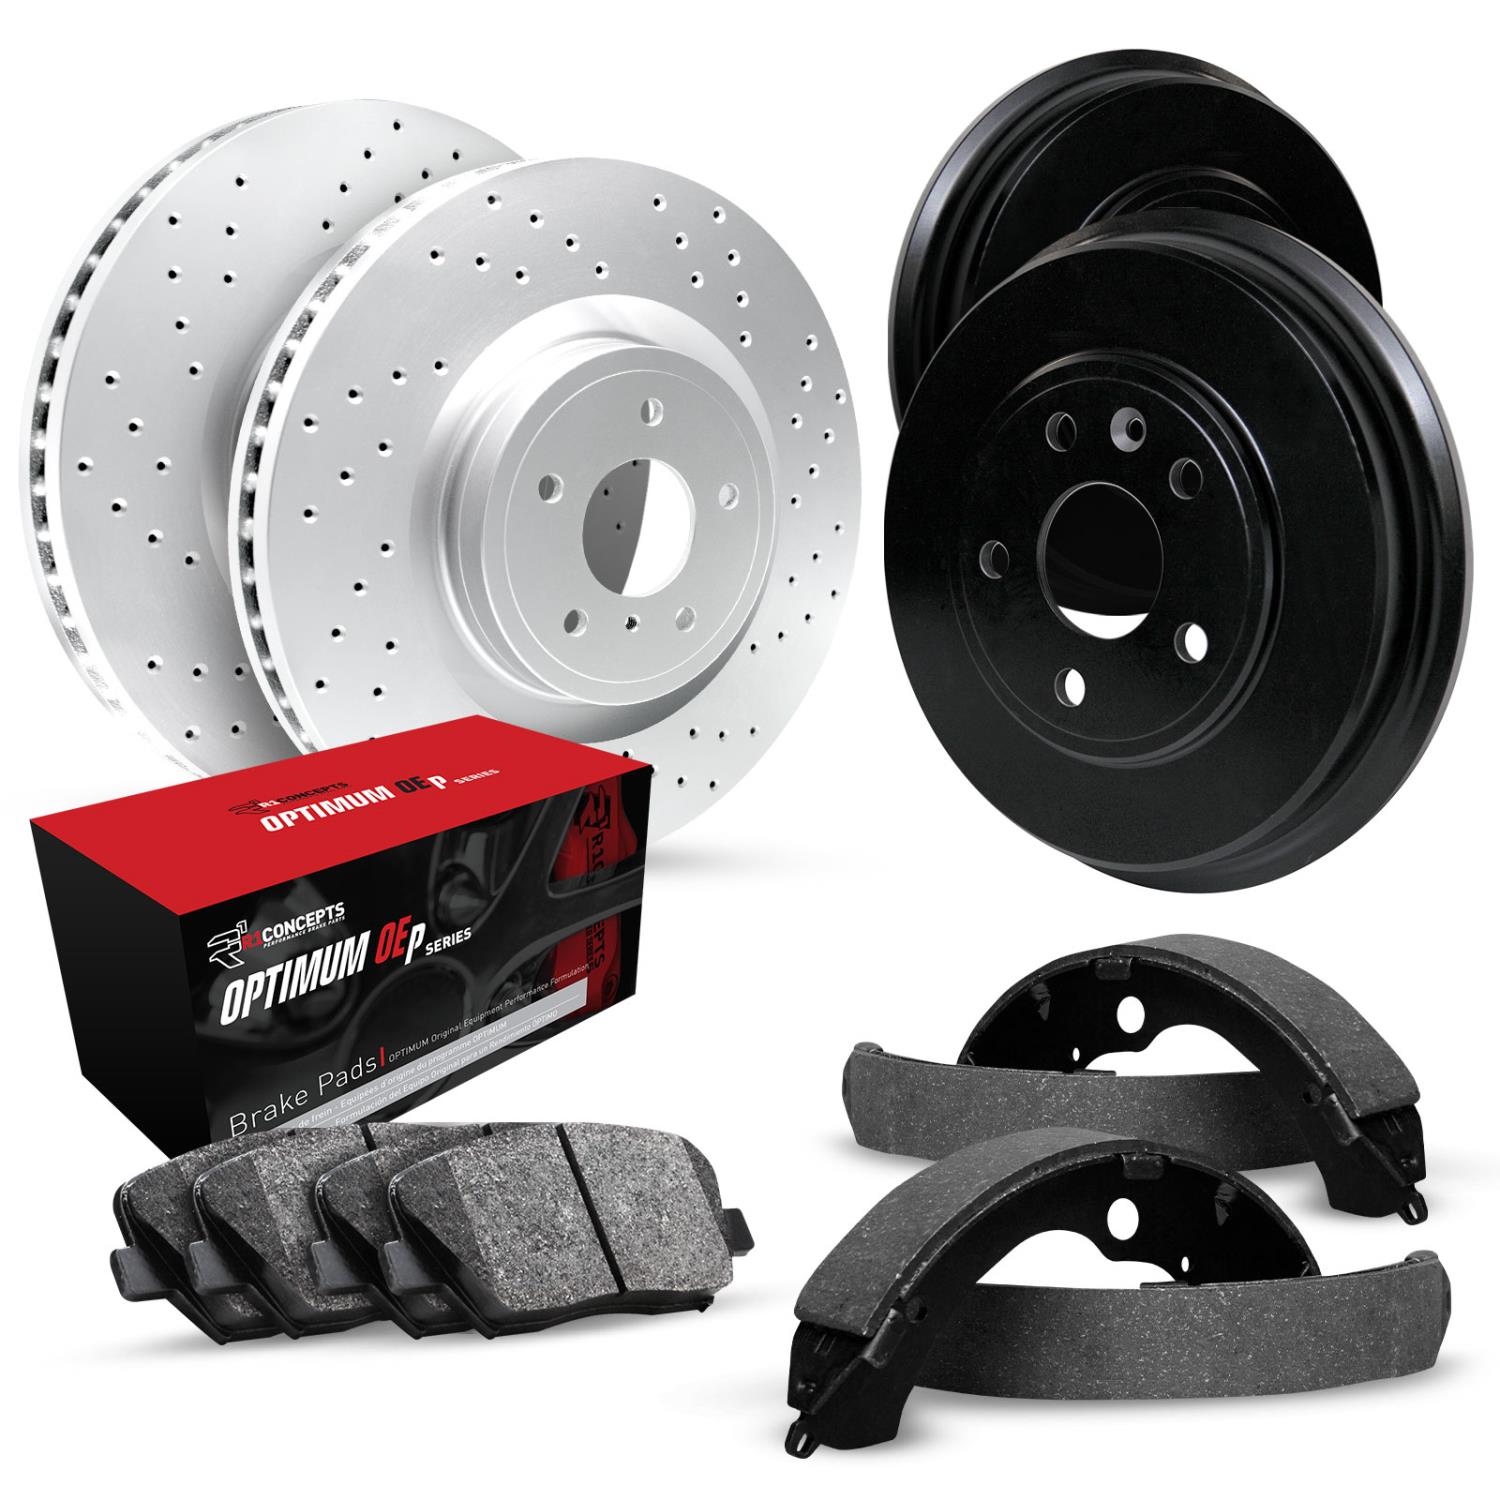 GEO-Carbon Drilled Brake Rotor & Drum Set w/Optimum OE Pads & Shoes, 1983-1984 GM, Position: Front & Rear